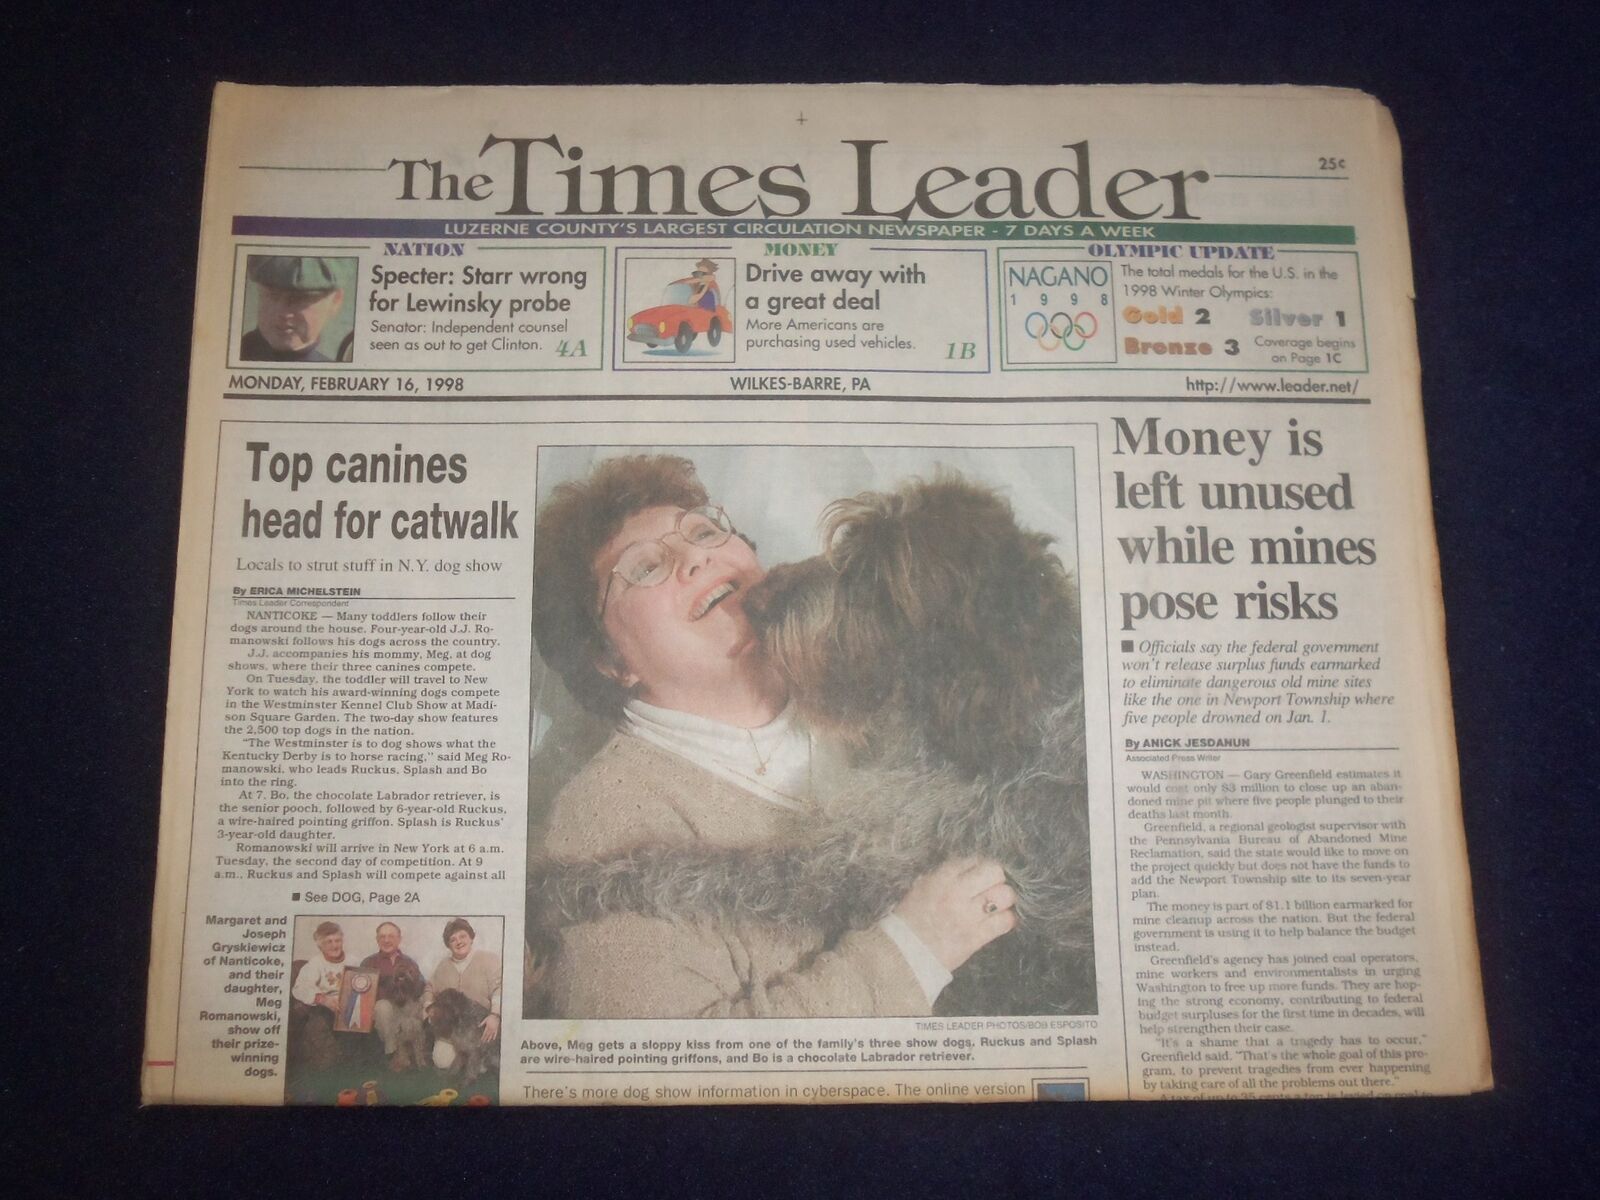 1998 FEB 16 WILKES-BARRE TIMES LEADER - STARR WRONG FOR LEWINSKY PROBE - NP 8211